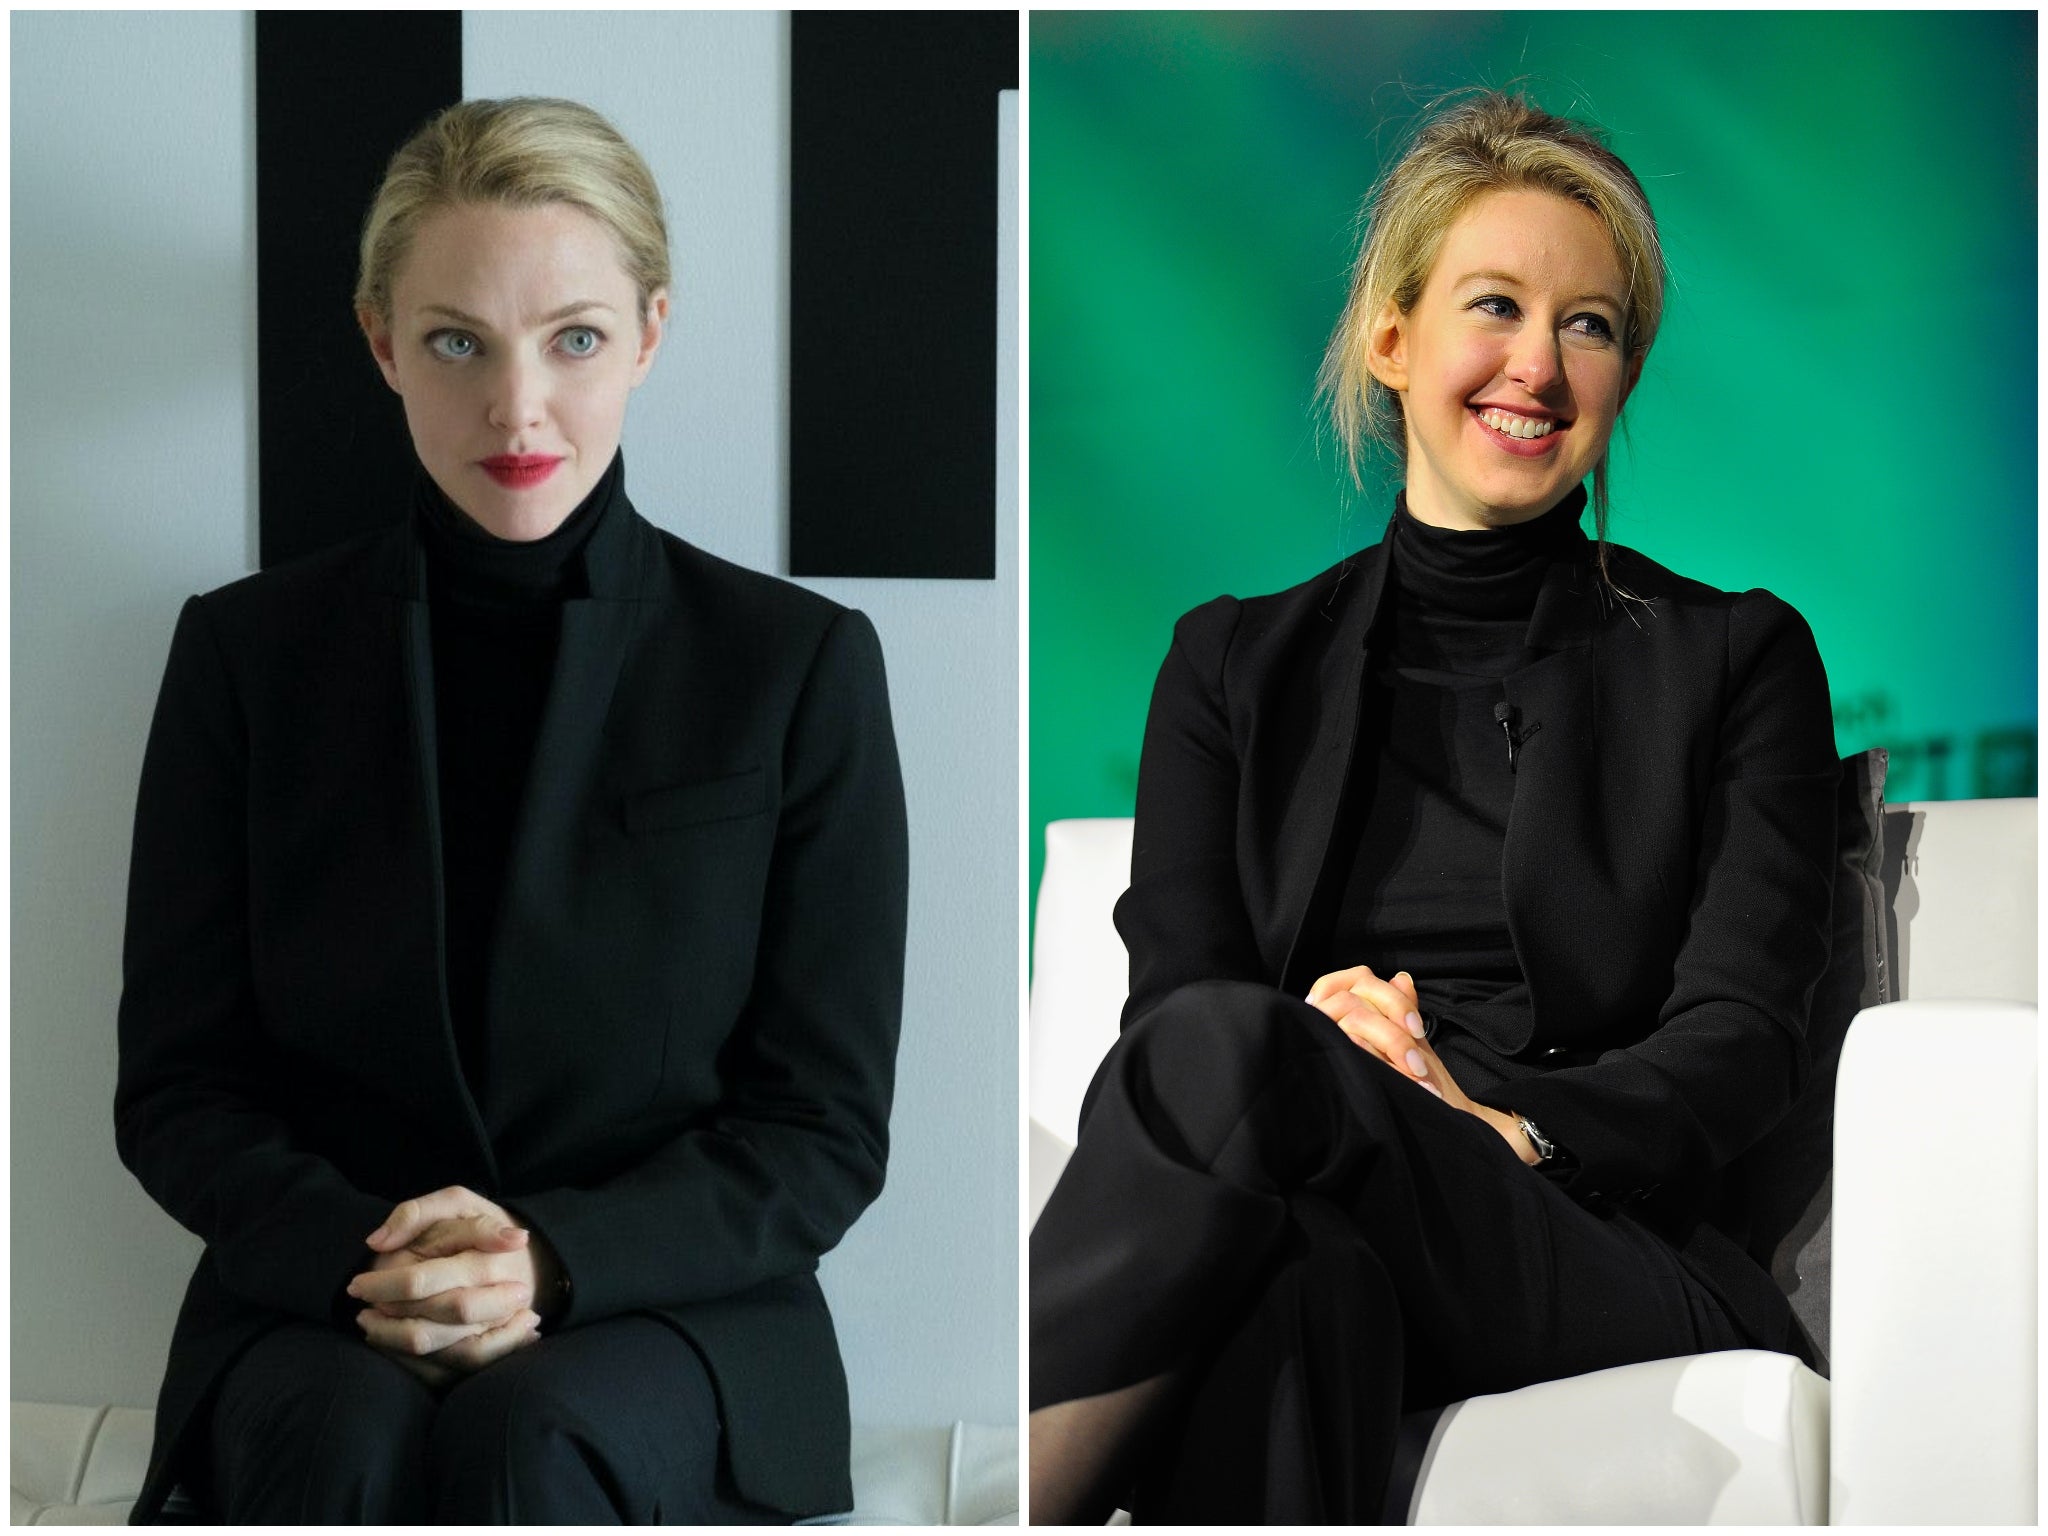 Amanda Seyfried in The Dropout (left) and Elizabeth Holmes in 2014 (right)